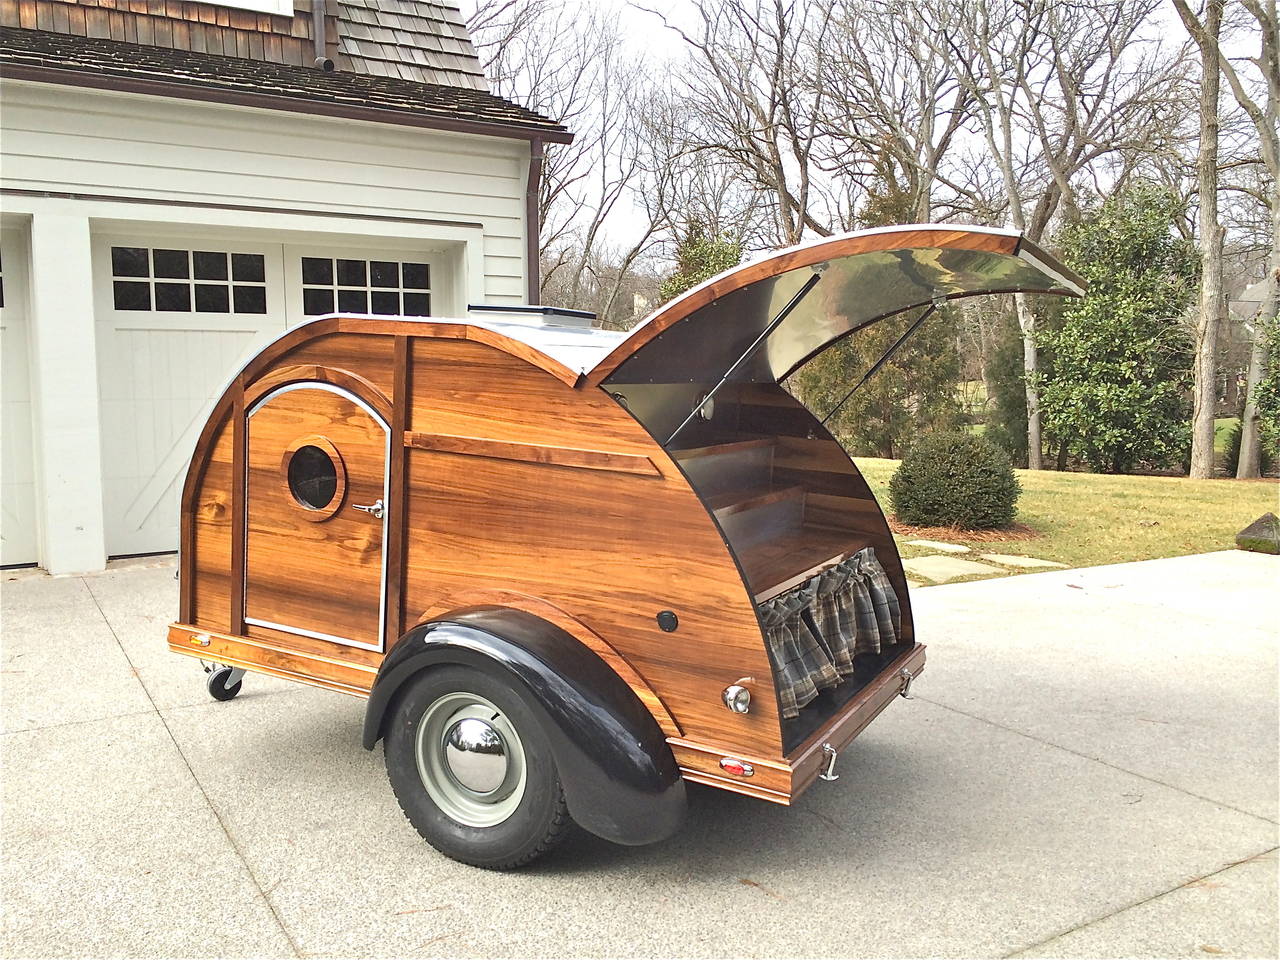 Meet The Sherpa!

She is a custom-made walnut teardrop trailer built from trailer plans from the 1940s. Teardrops have been built in garages ever since GI’s returned from WWII. Before the war, most people had never travelled even a few miles from